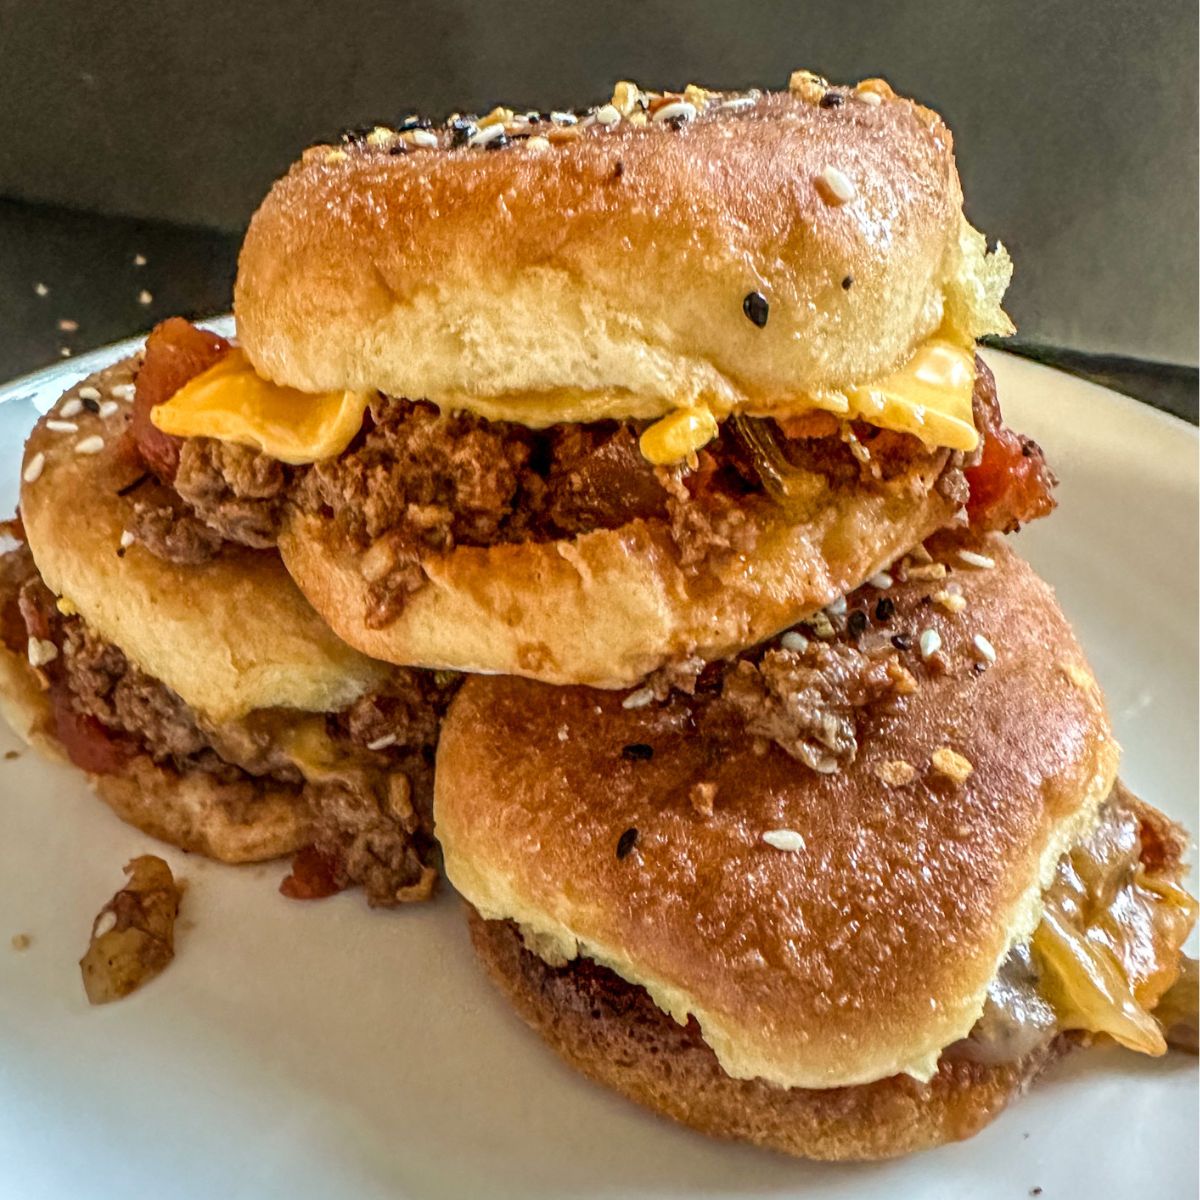 Three Sloppy Joe Sliders stacked on top of each other.